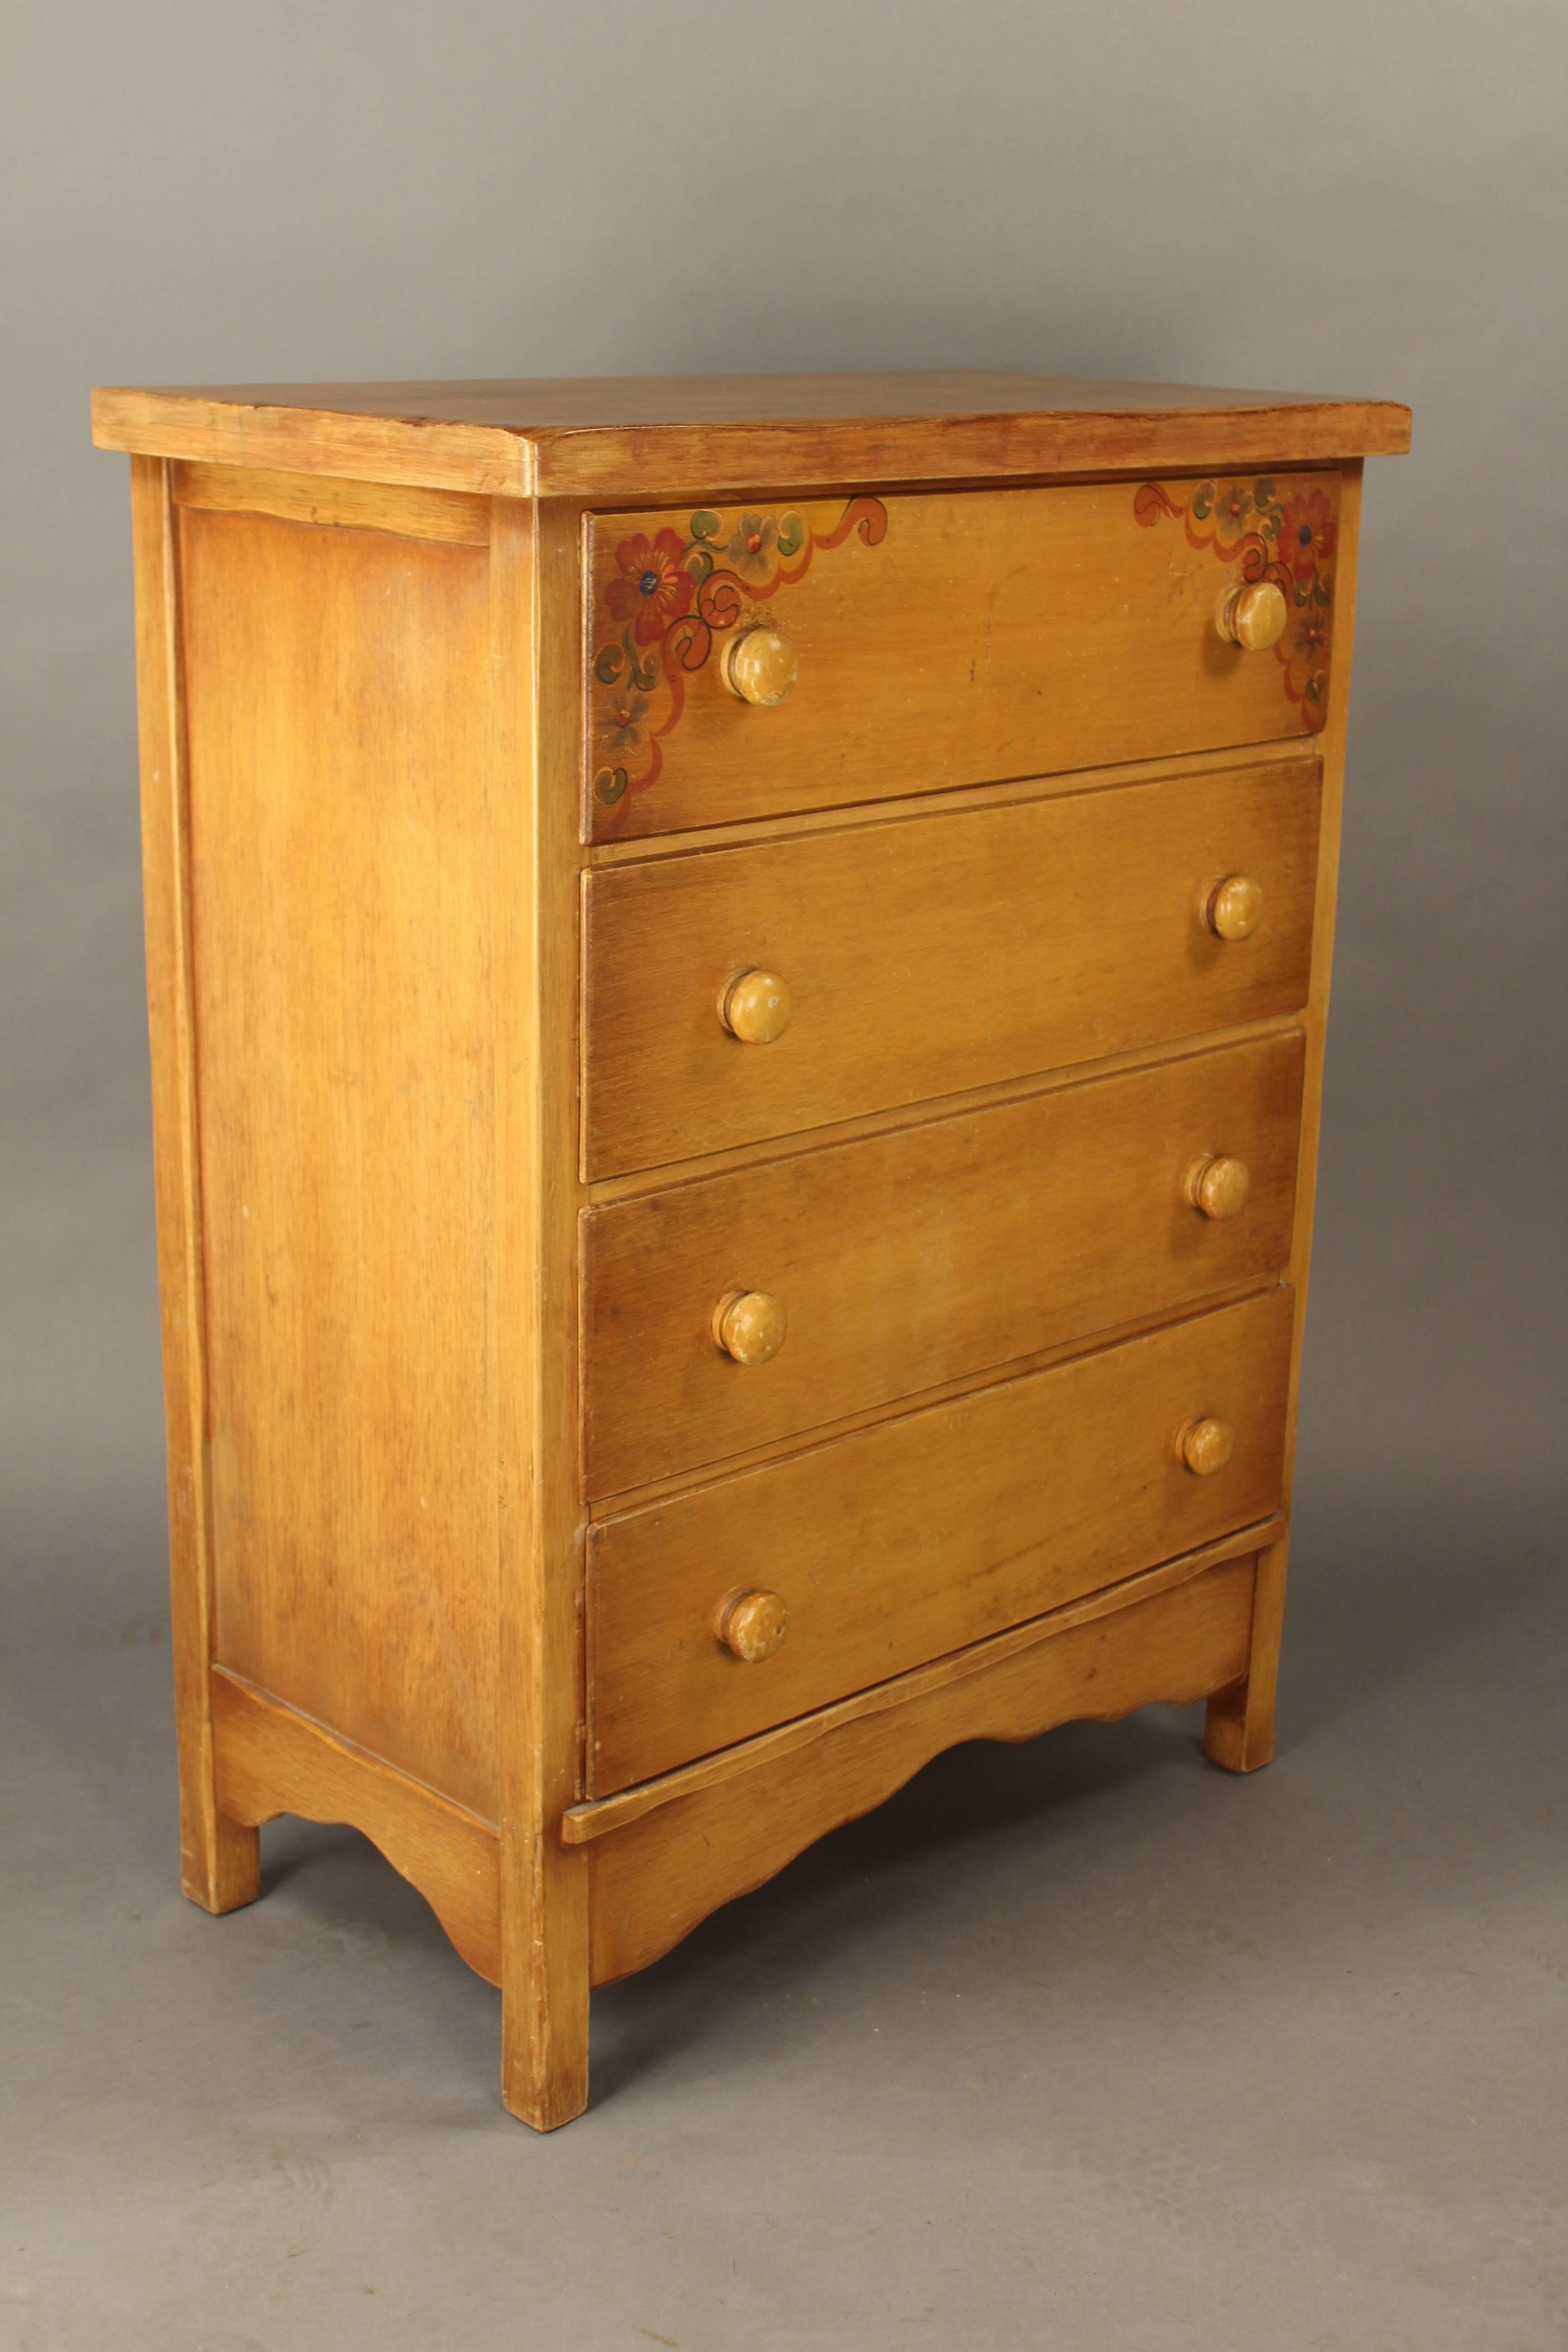 Charming 1930s signed Coronado Cie dresser with hand-painted floral designs in the corners.